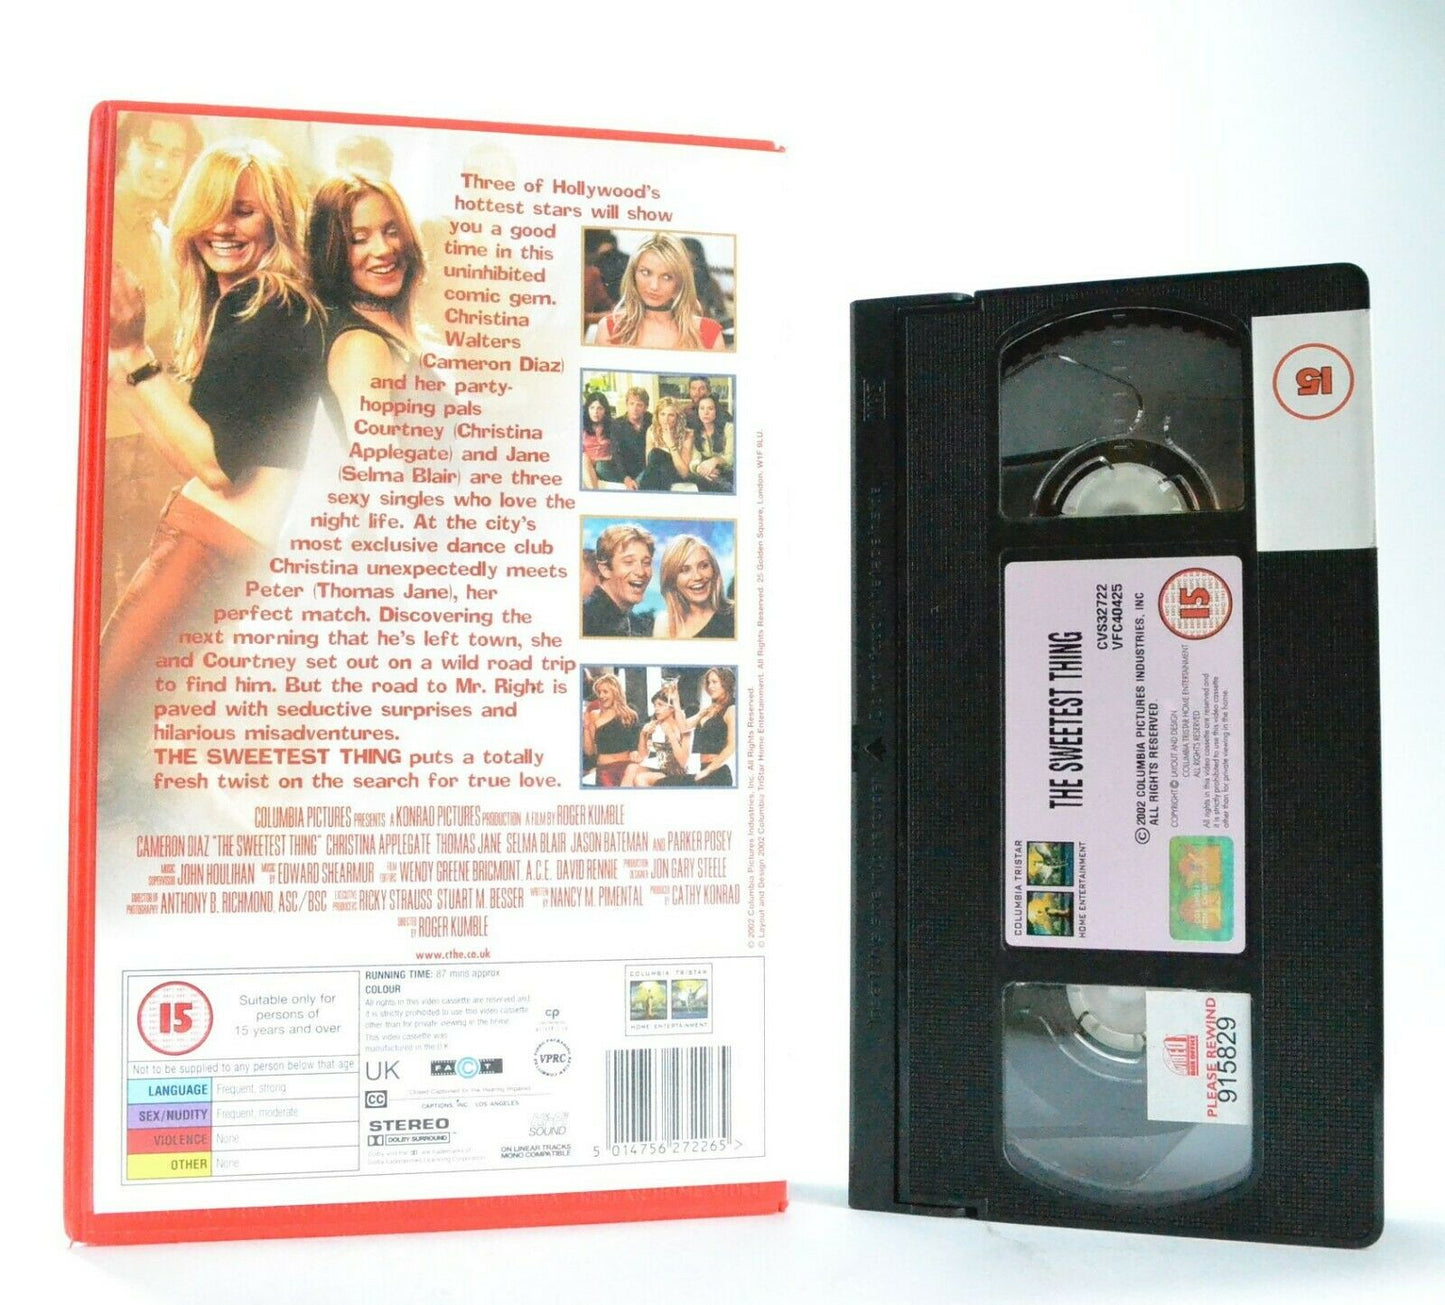 The Sweetest Thing: Romantic Comedy - Large Box - Swinging Singles Market - VHS-